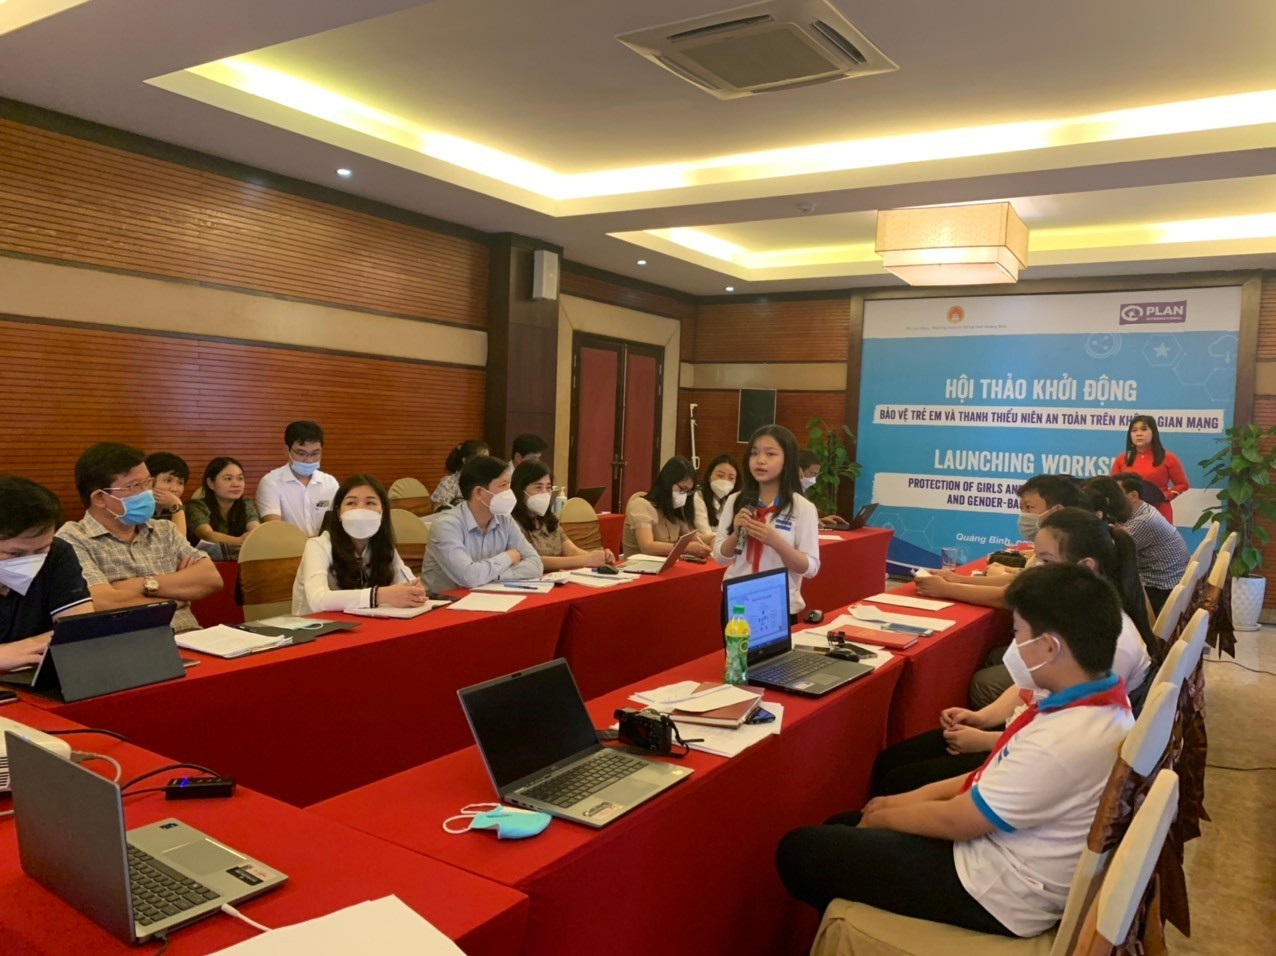 NGO Combats Cyber Bullying and Gender-based Cyber Violence in Vietnam